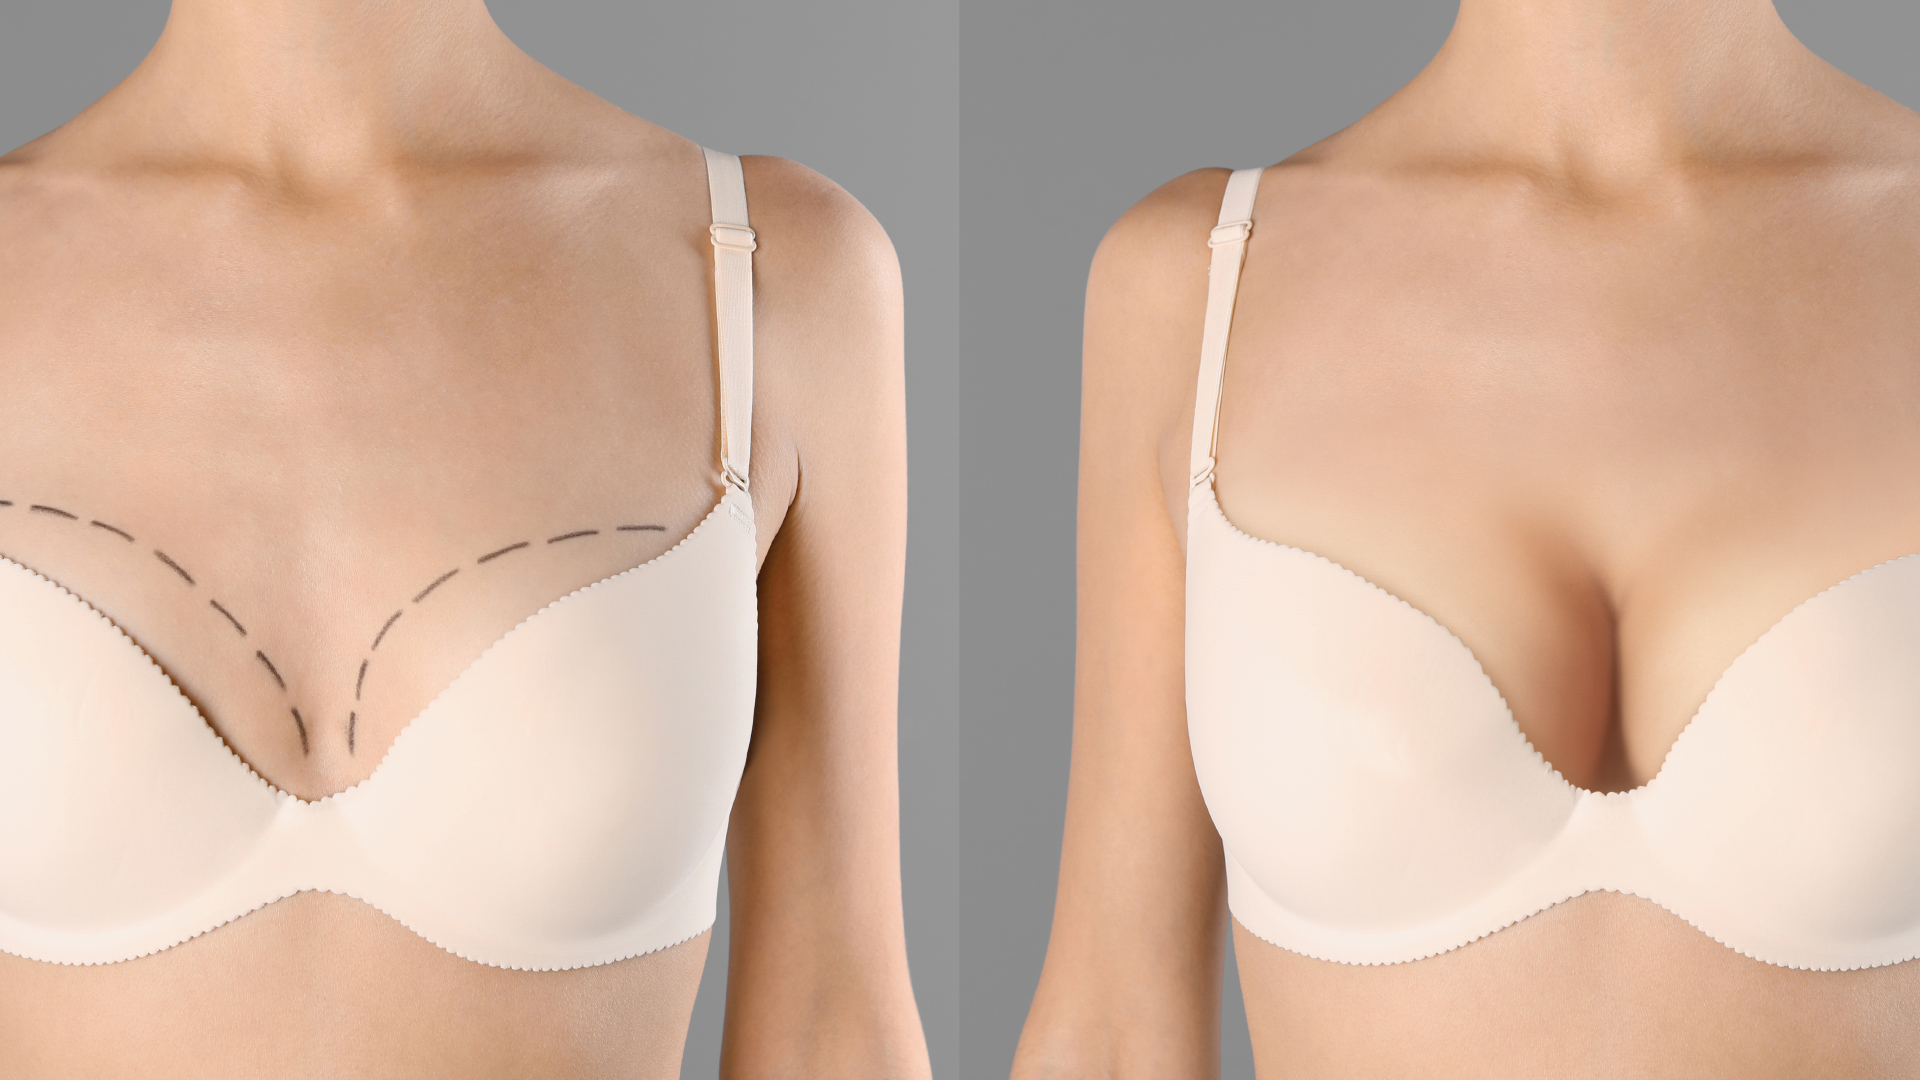 Premium Photo  Female breast comparison before and after breast asymmetry  correction surgery